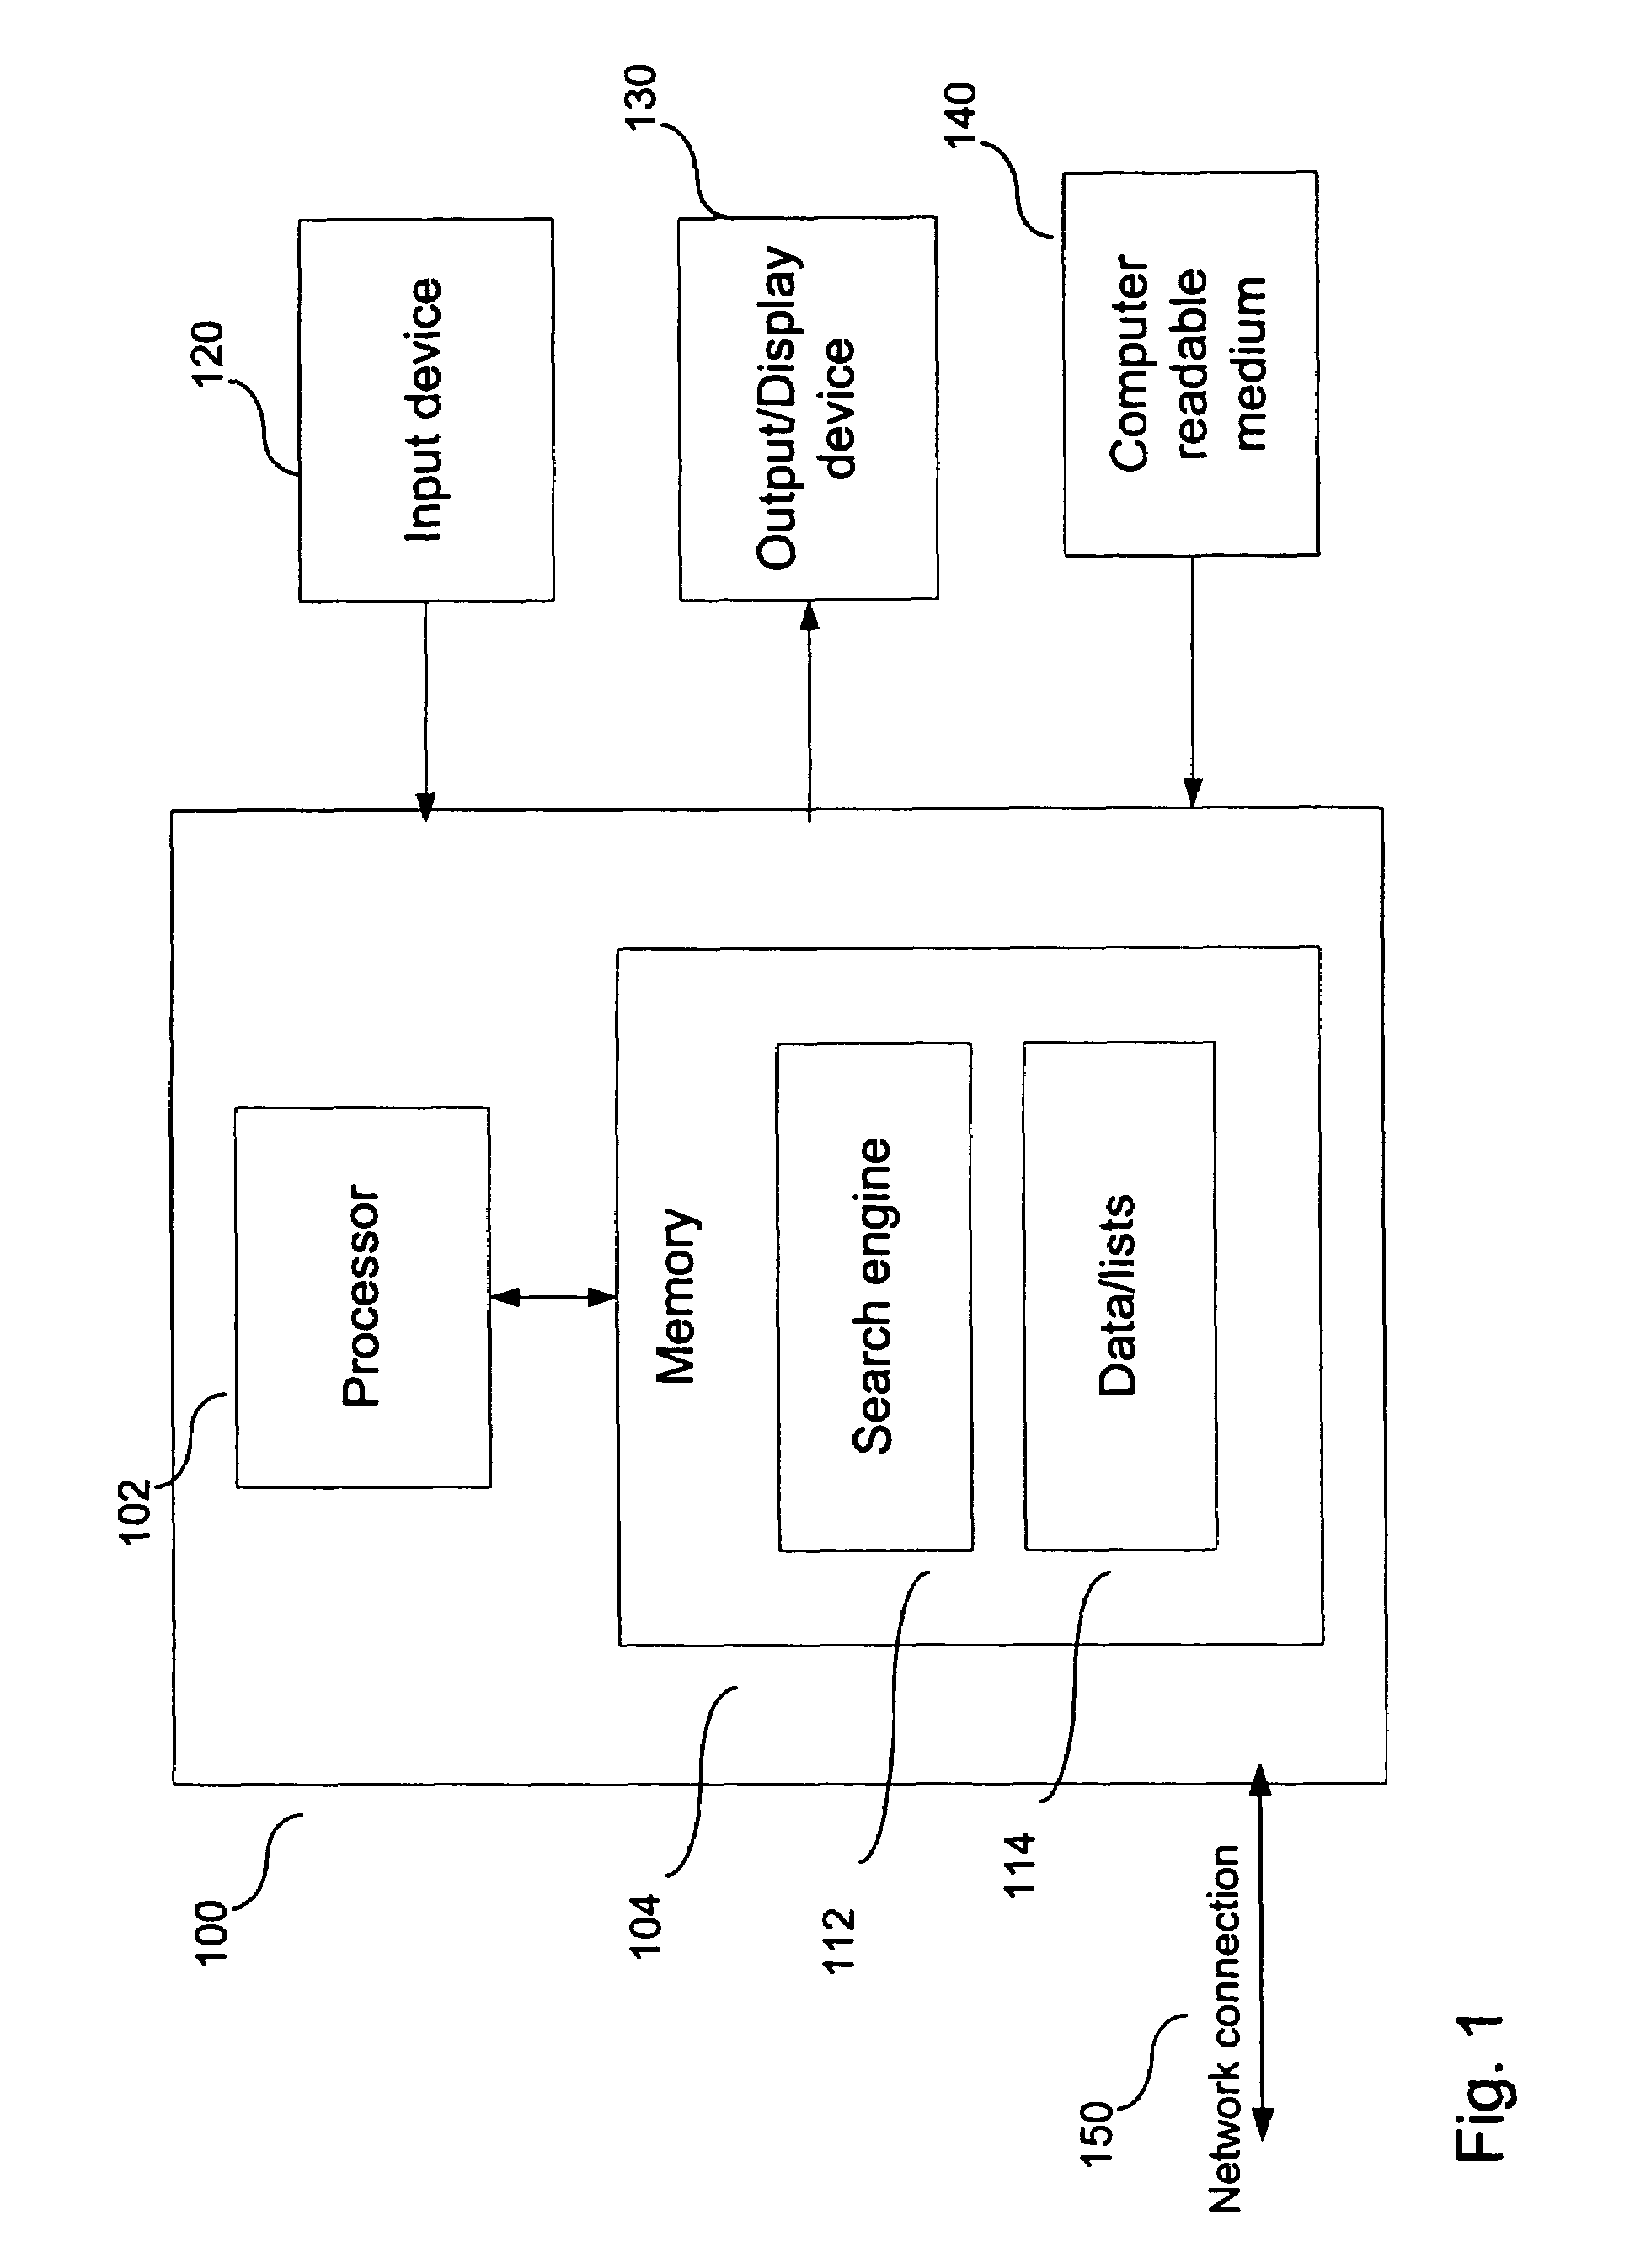 Method for ranking hypertext search results by analysis of hyperlinks from expert documents and keyword scope